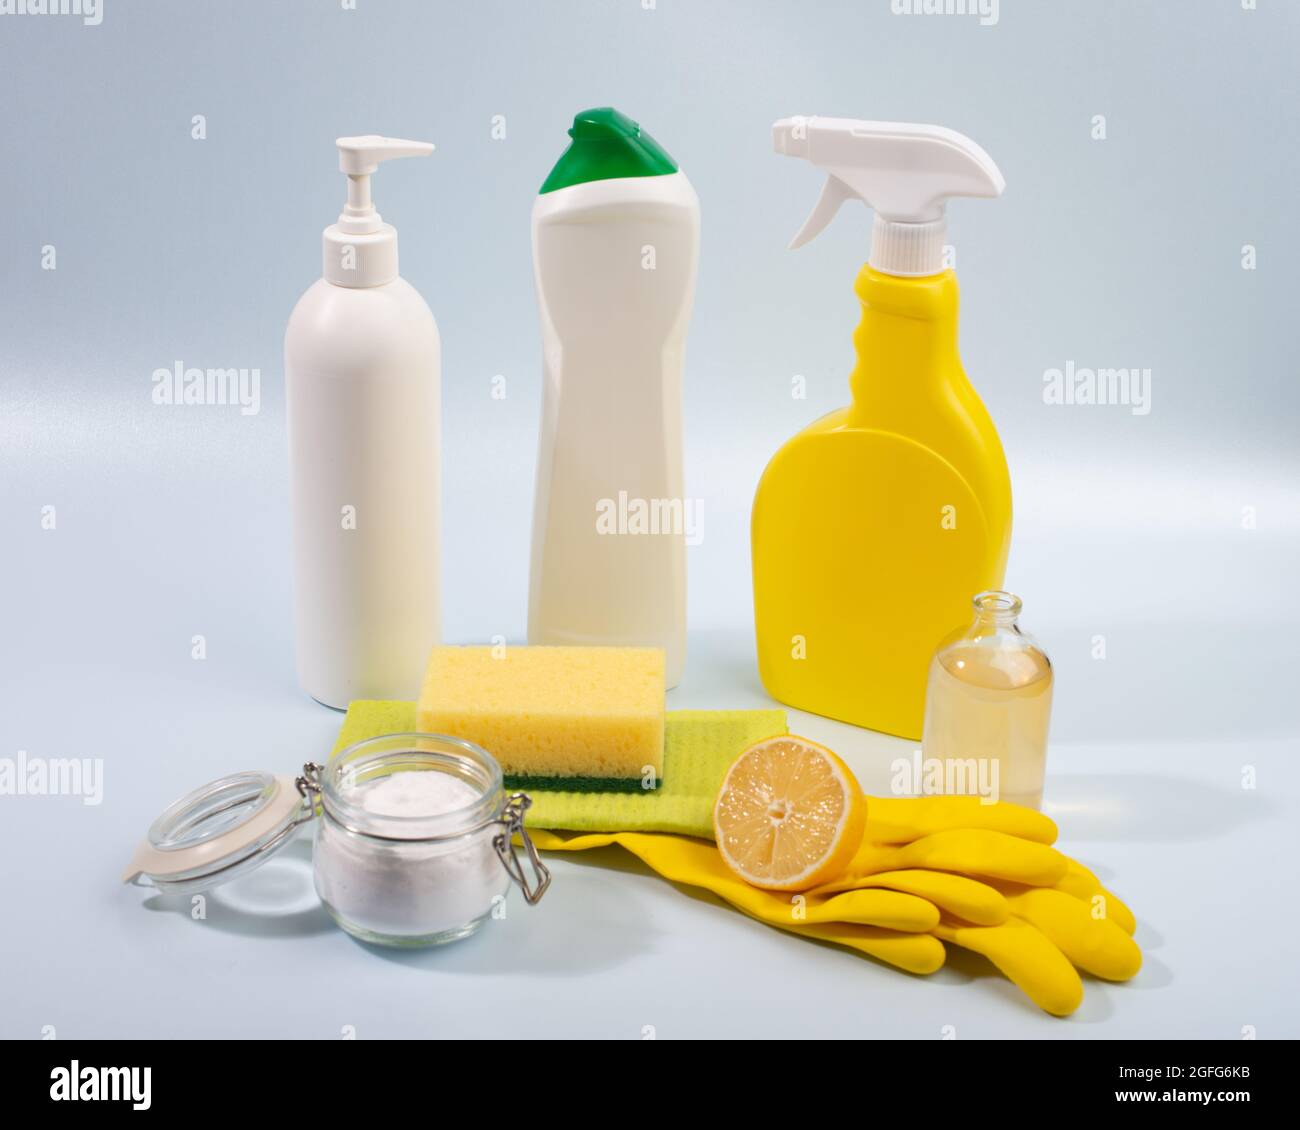 Natural organic home cleaning products. Healthy lifestyle. Stock Photo